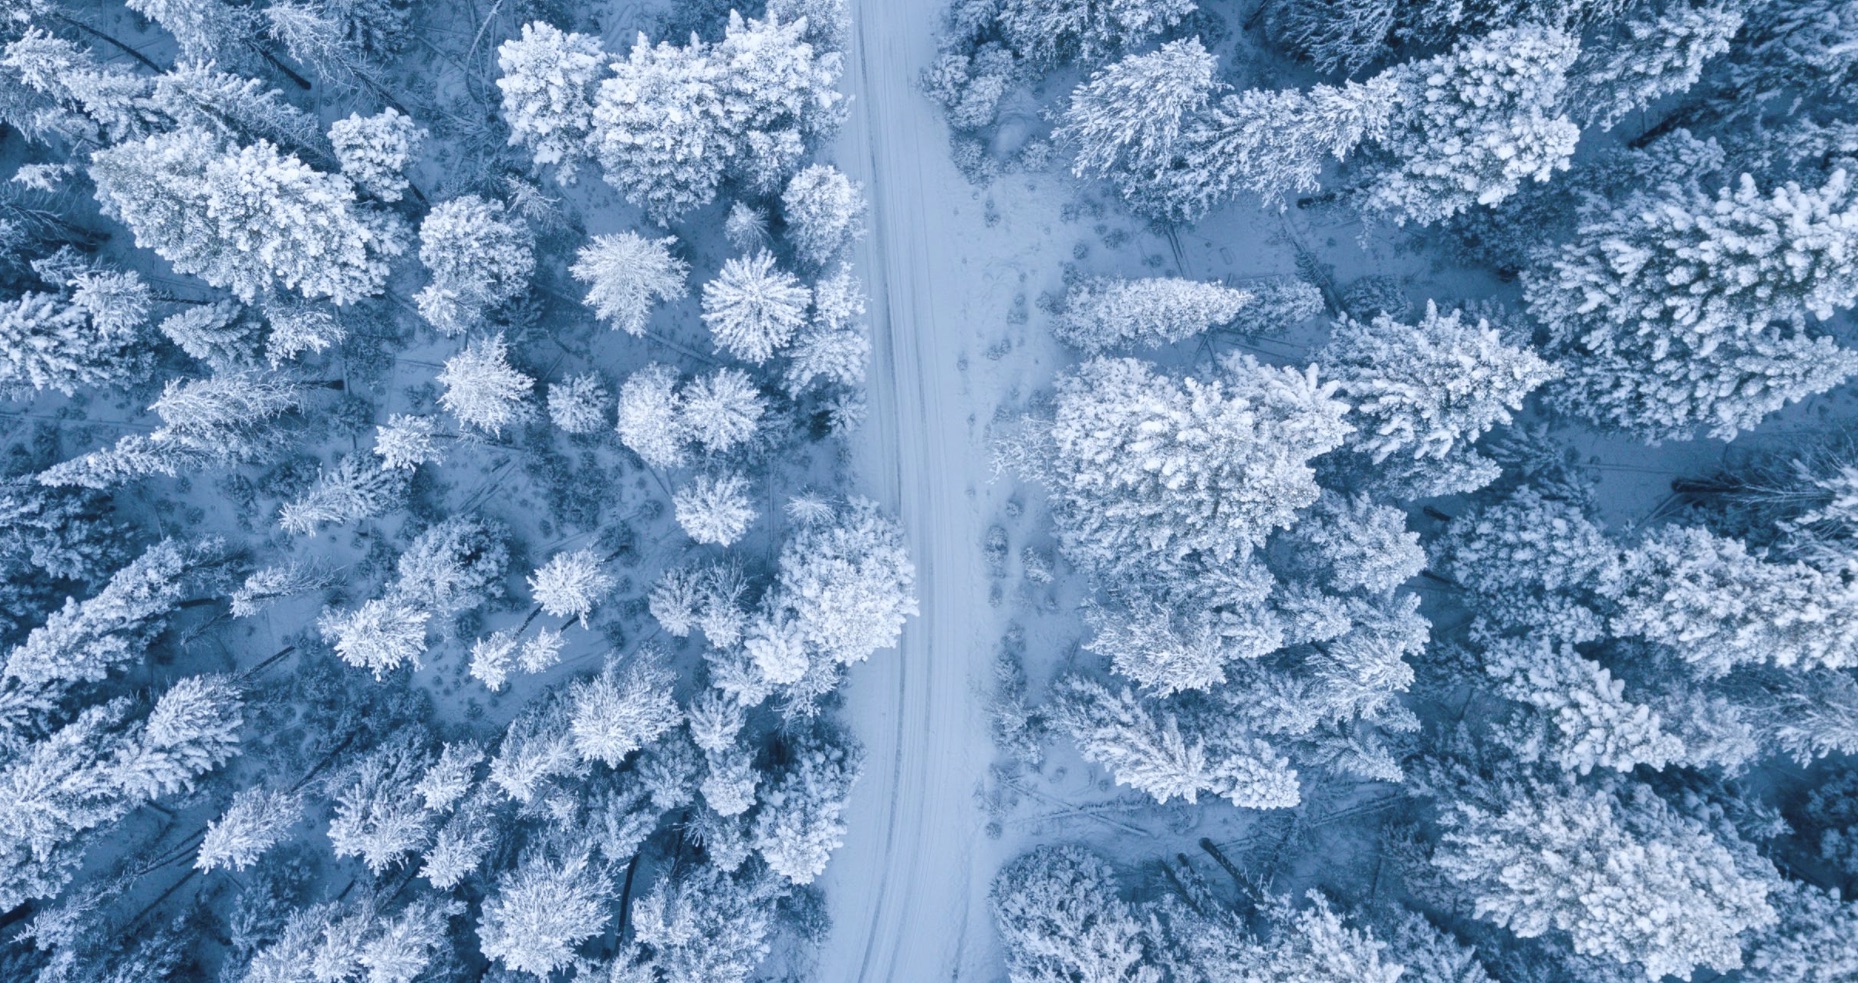 Trees and Roads Covered In Snow